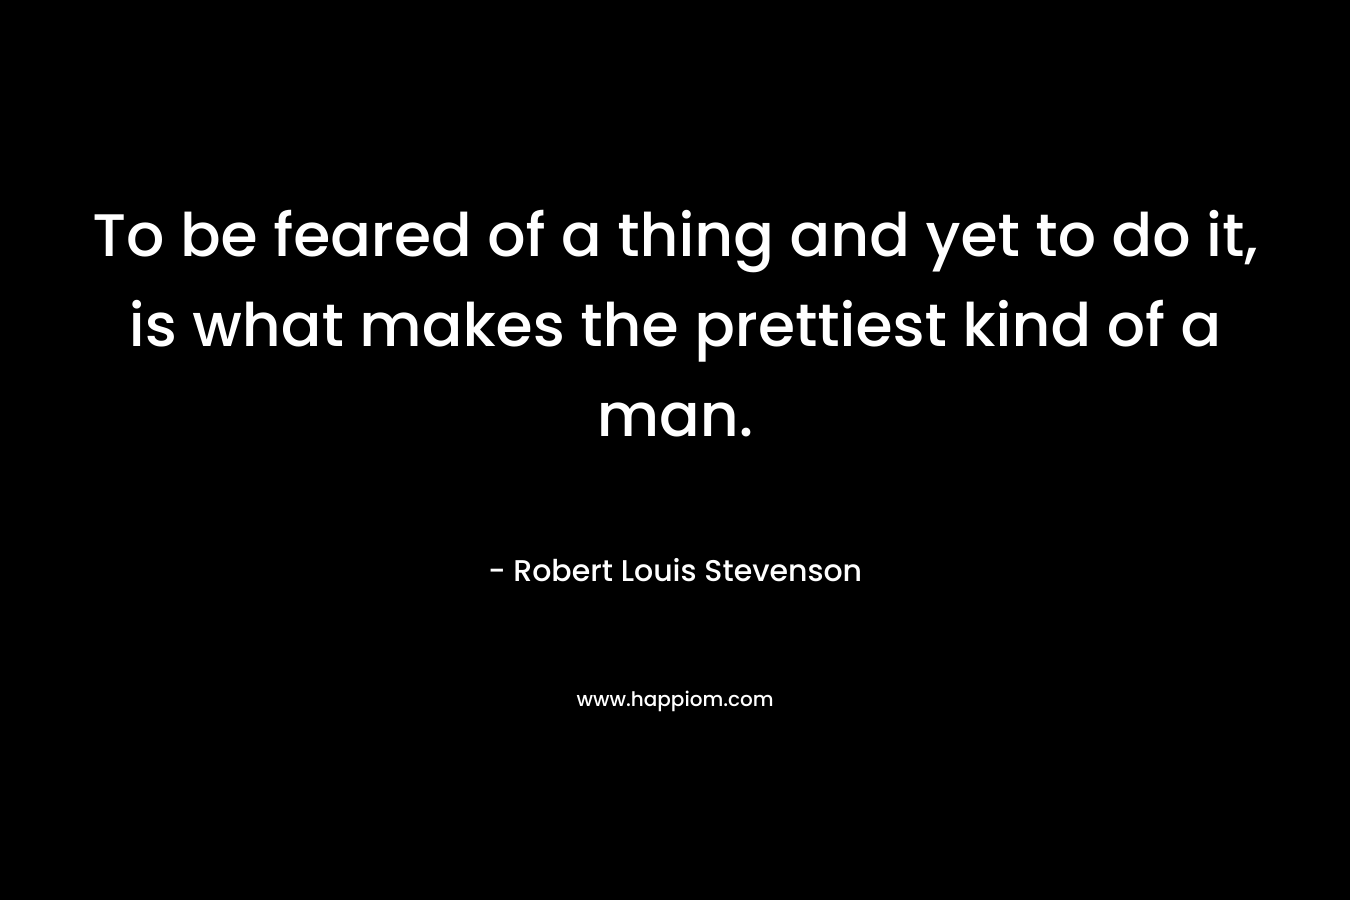 To be feared of a thing and yet to do it, is what makes the prettiest kind of a man.